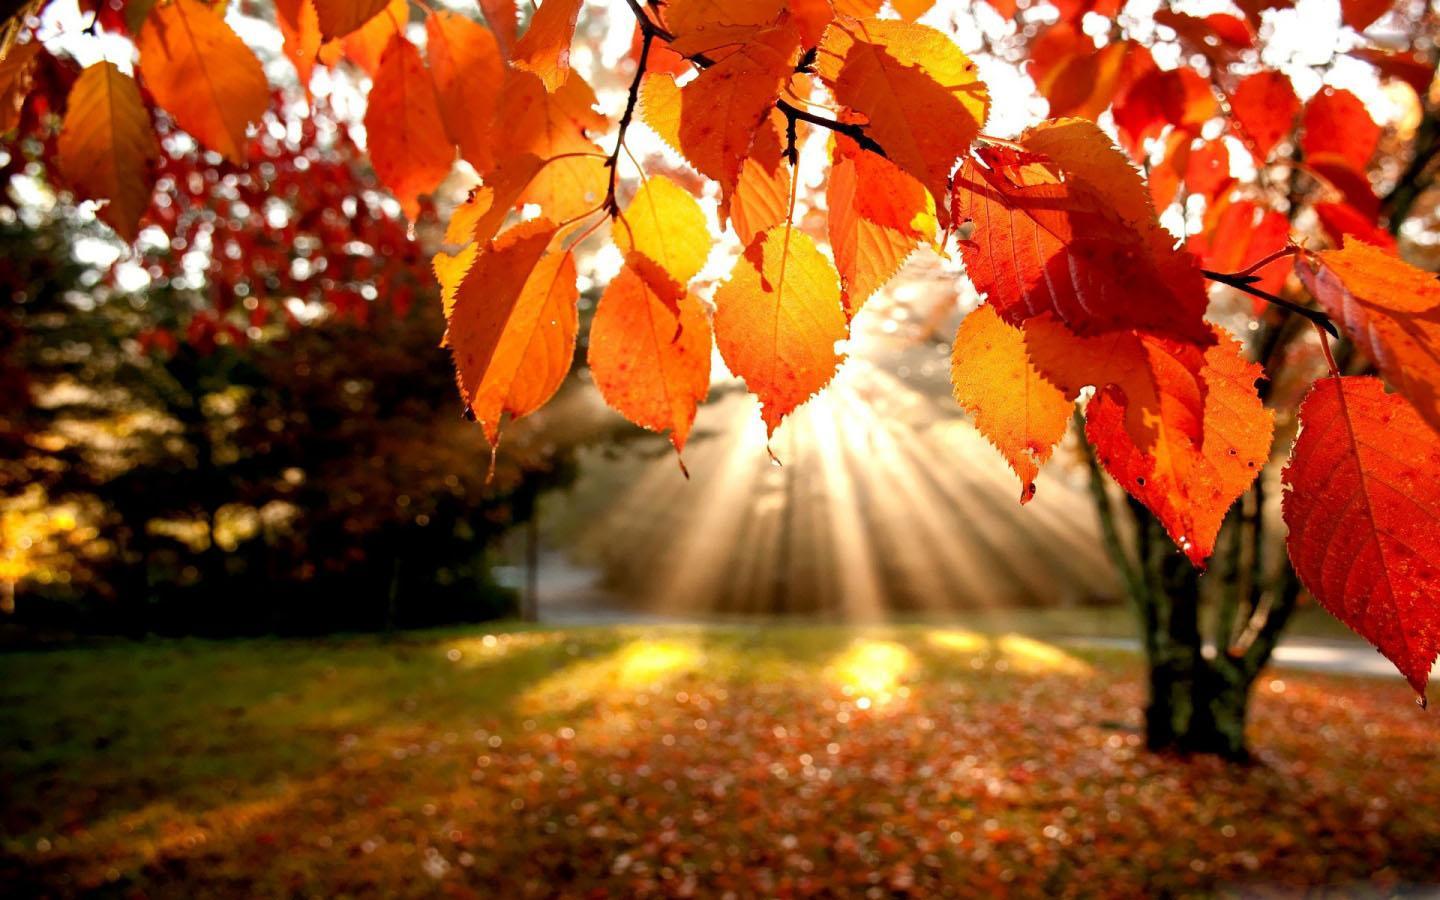 Romantic Autumn Wallpaper for Android